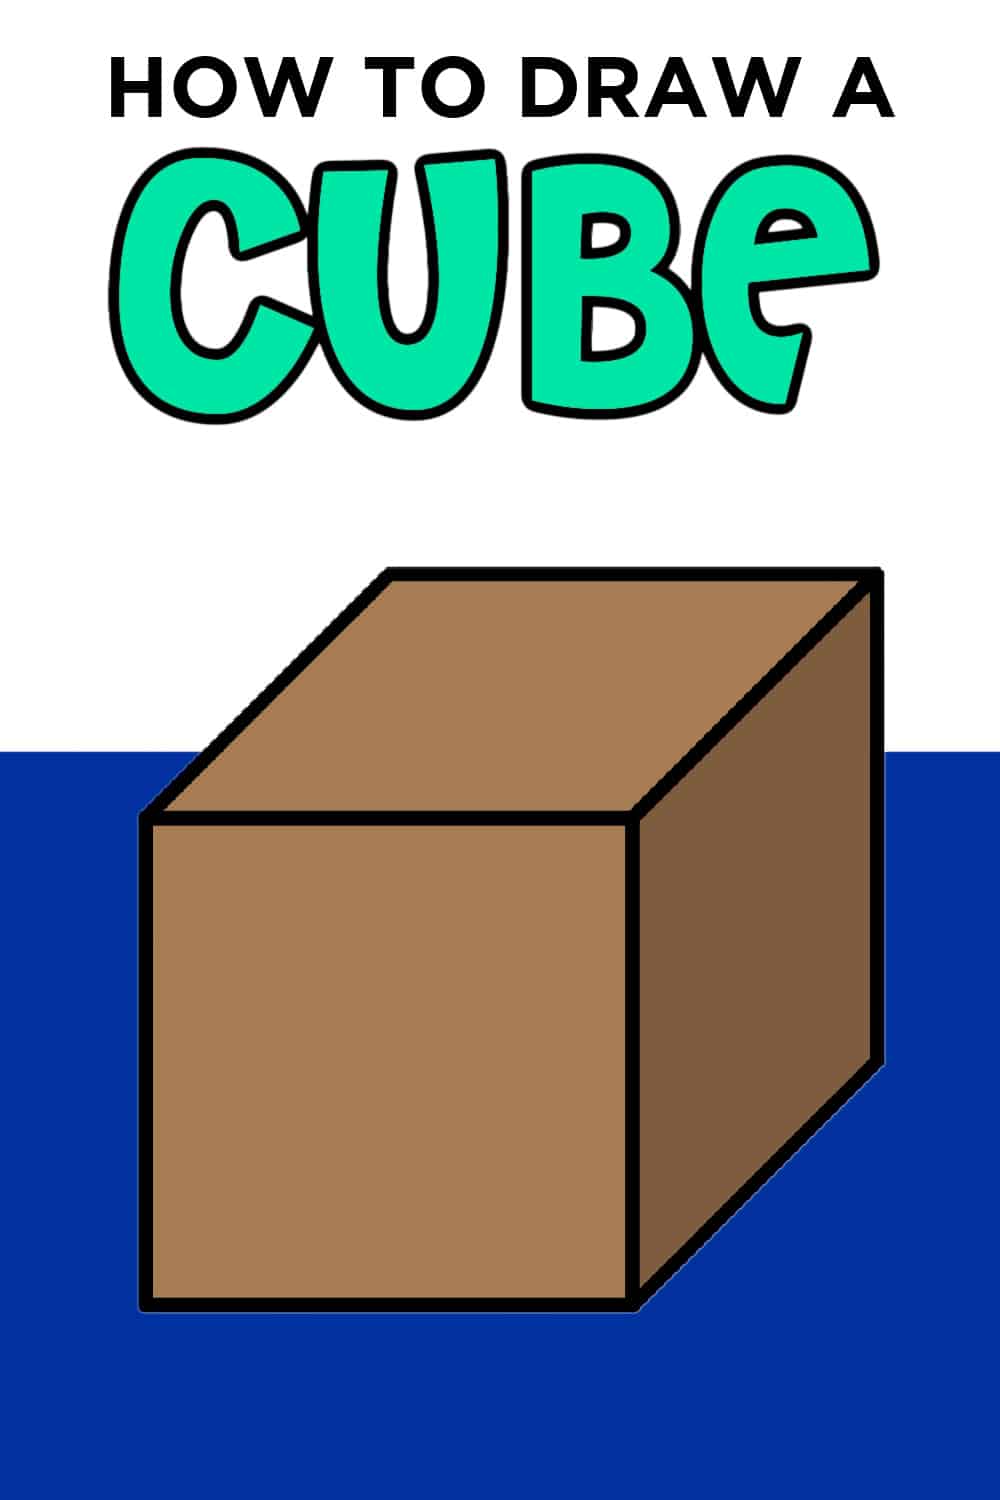 how to draw a cube in 3d